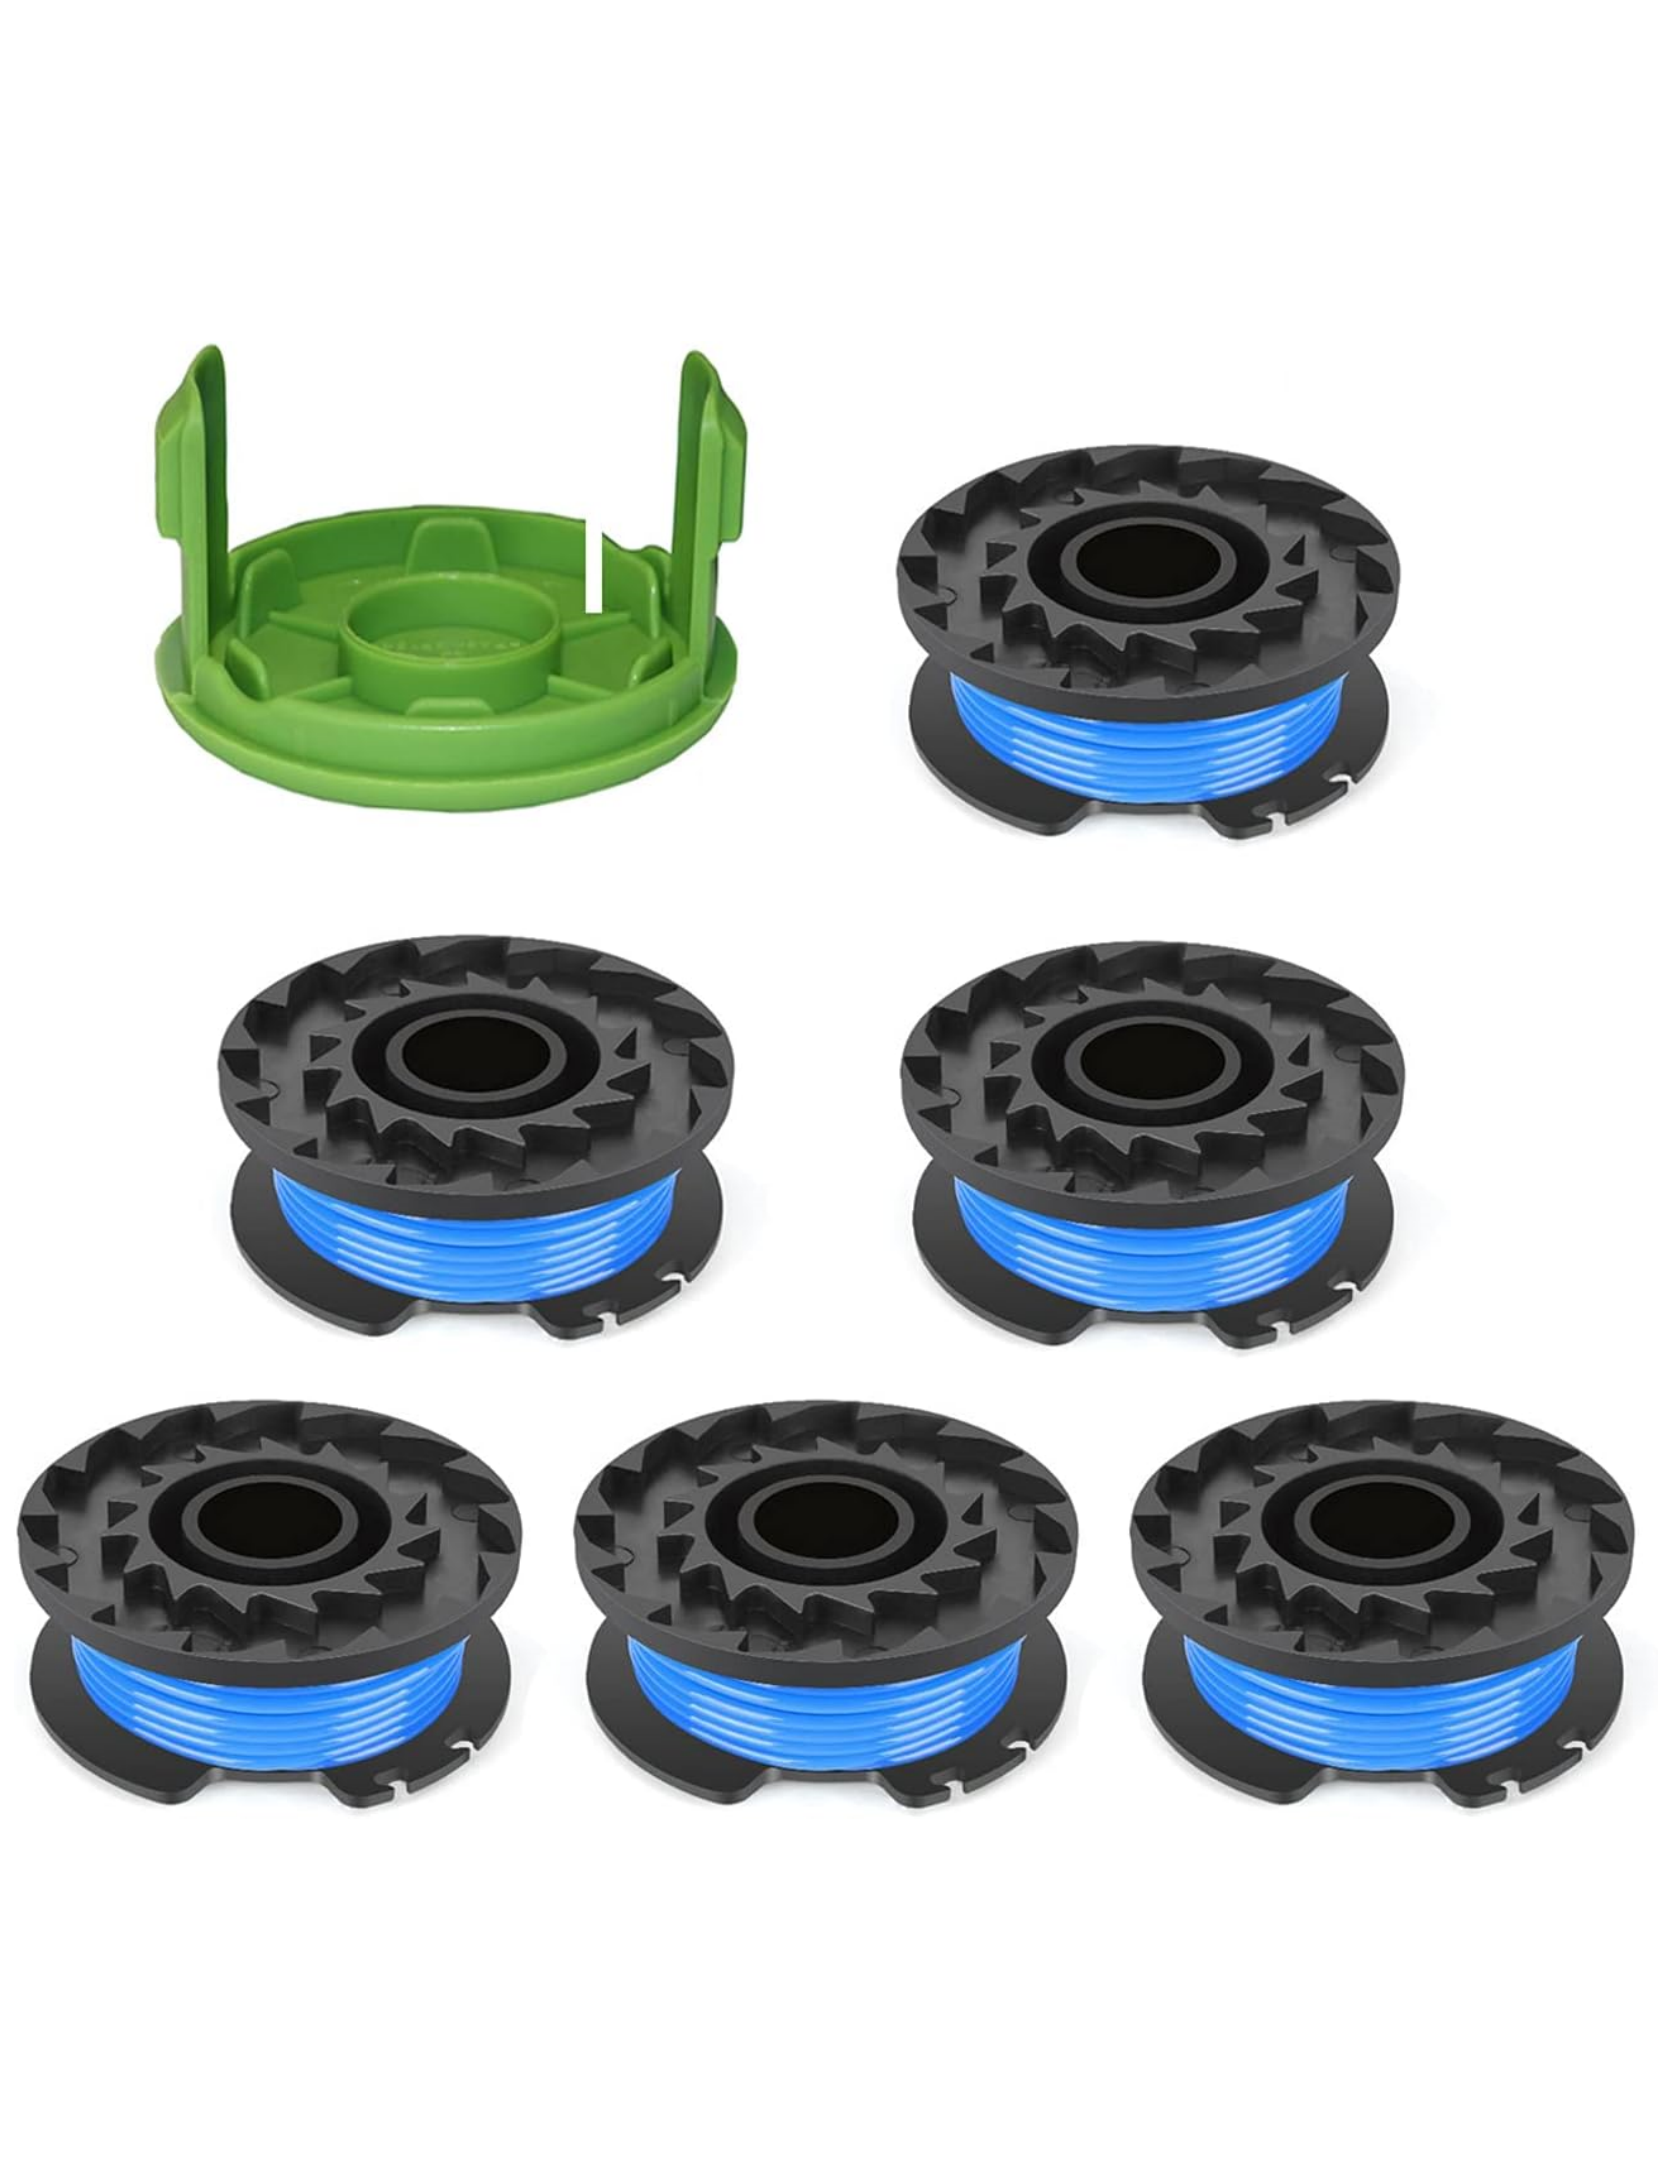 THTEN 29252 29092 Weed Eater Spools Replacement for Greenworks 21302 21332 21342 20V 24V 40V 16ft 0.065 Single Line String Trimmer with 3411546A-6 Cap Covers Parts Auto-Feed String Edger 6+1